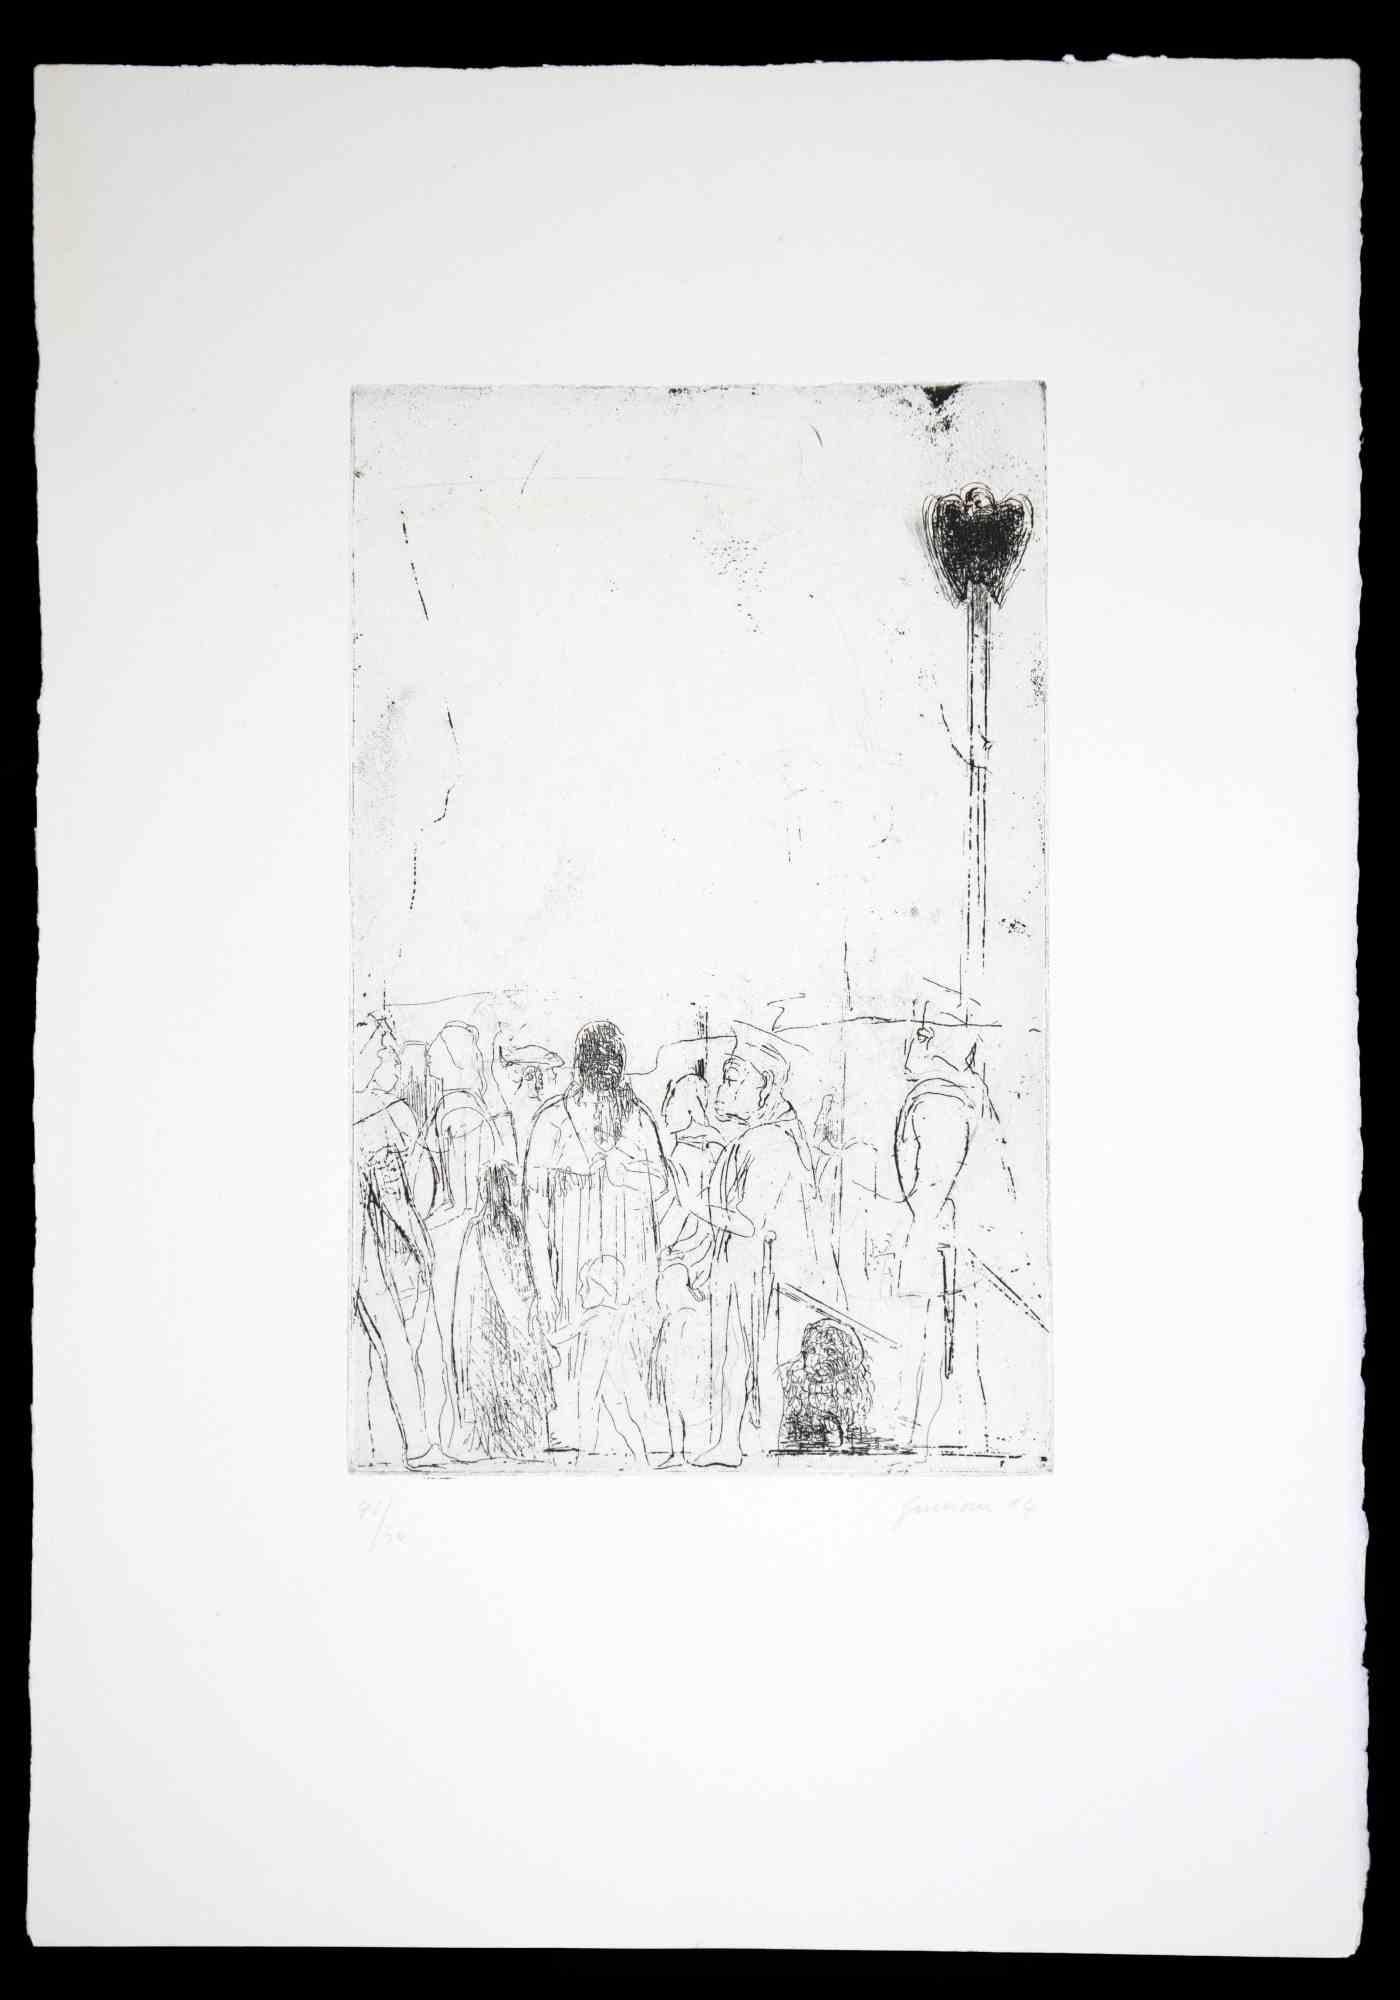 The Manifestation - Etching and Drypoint by Piero Guccione - 1964